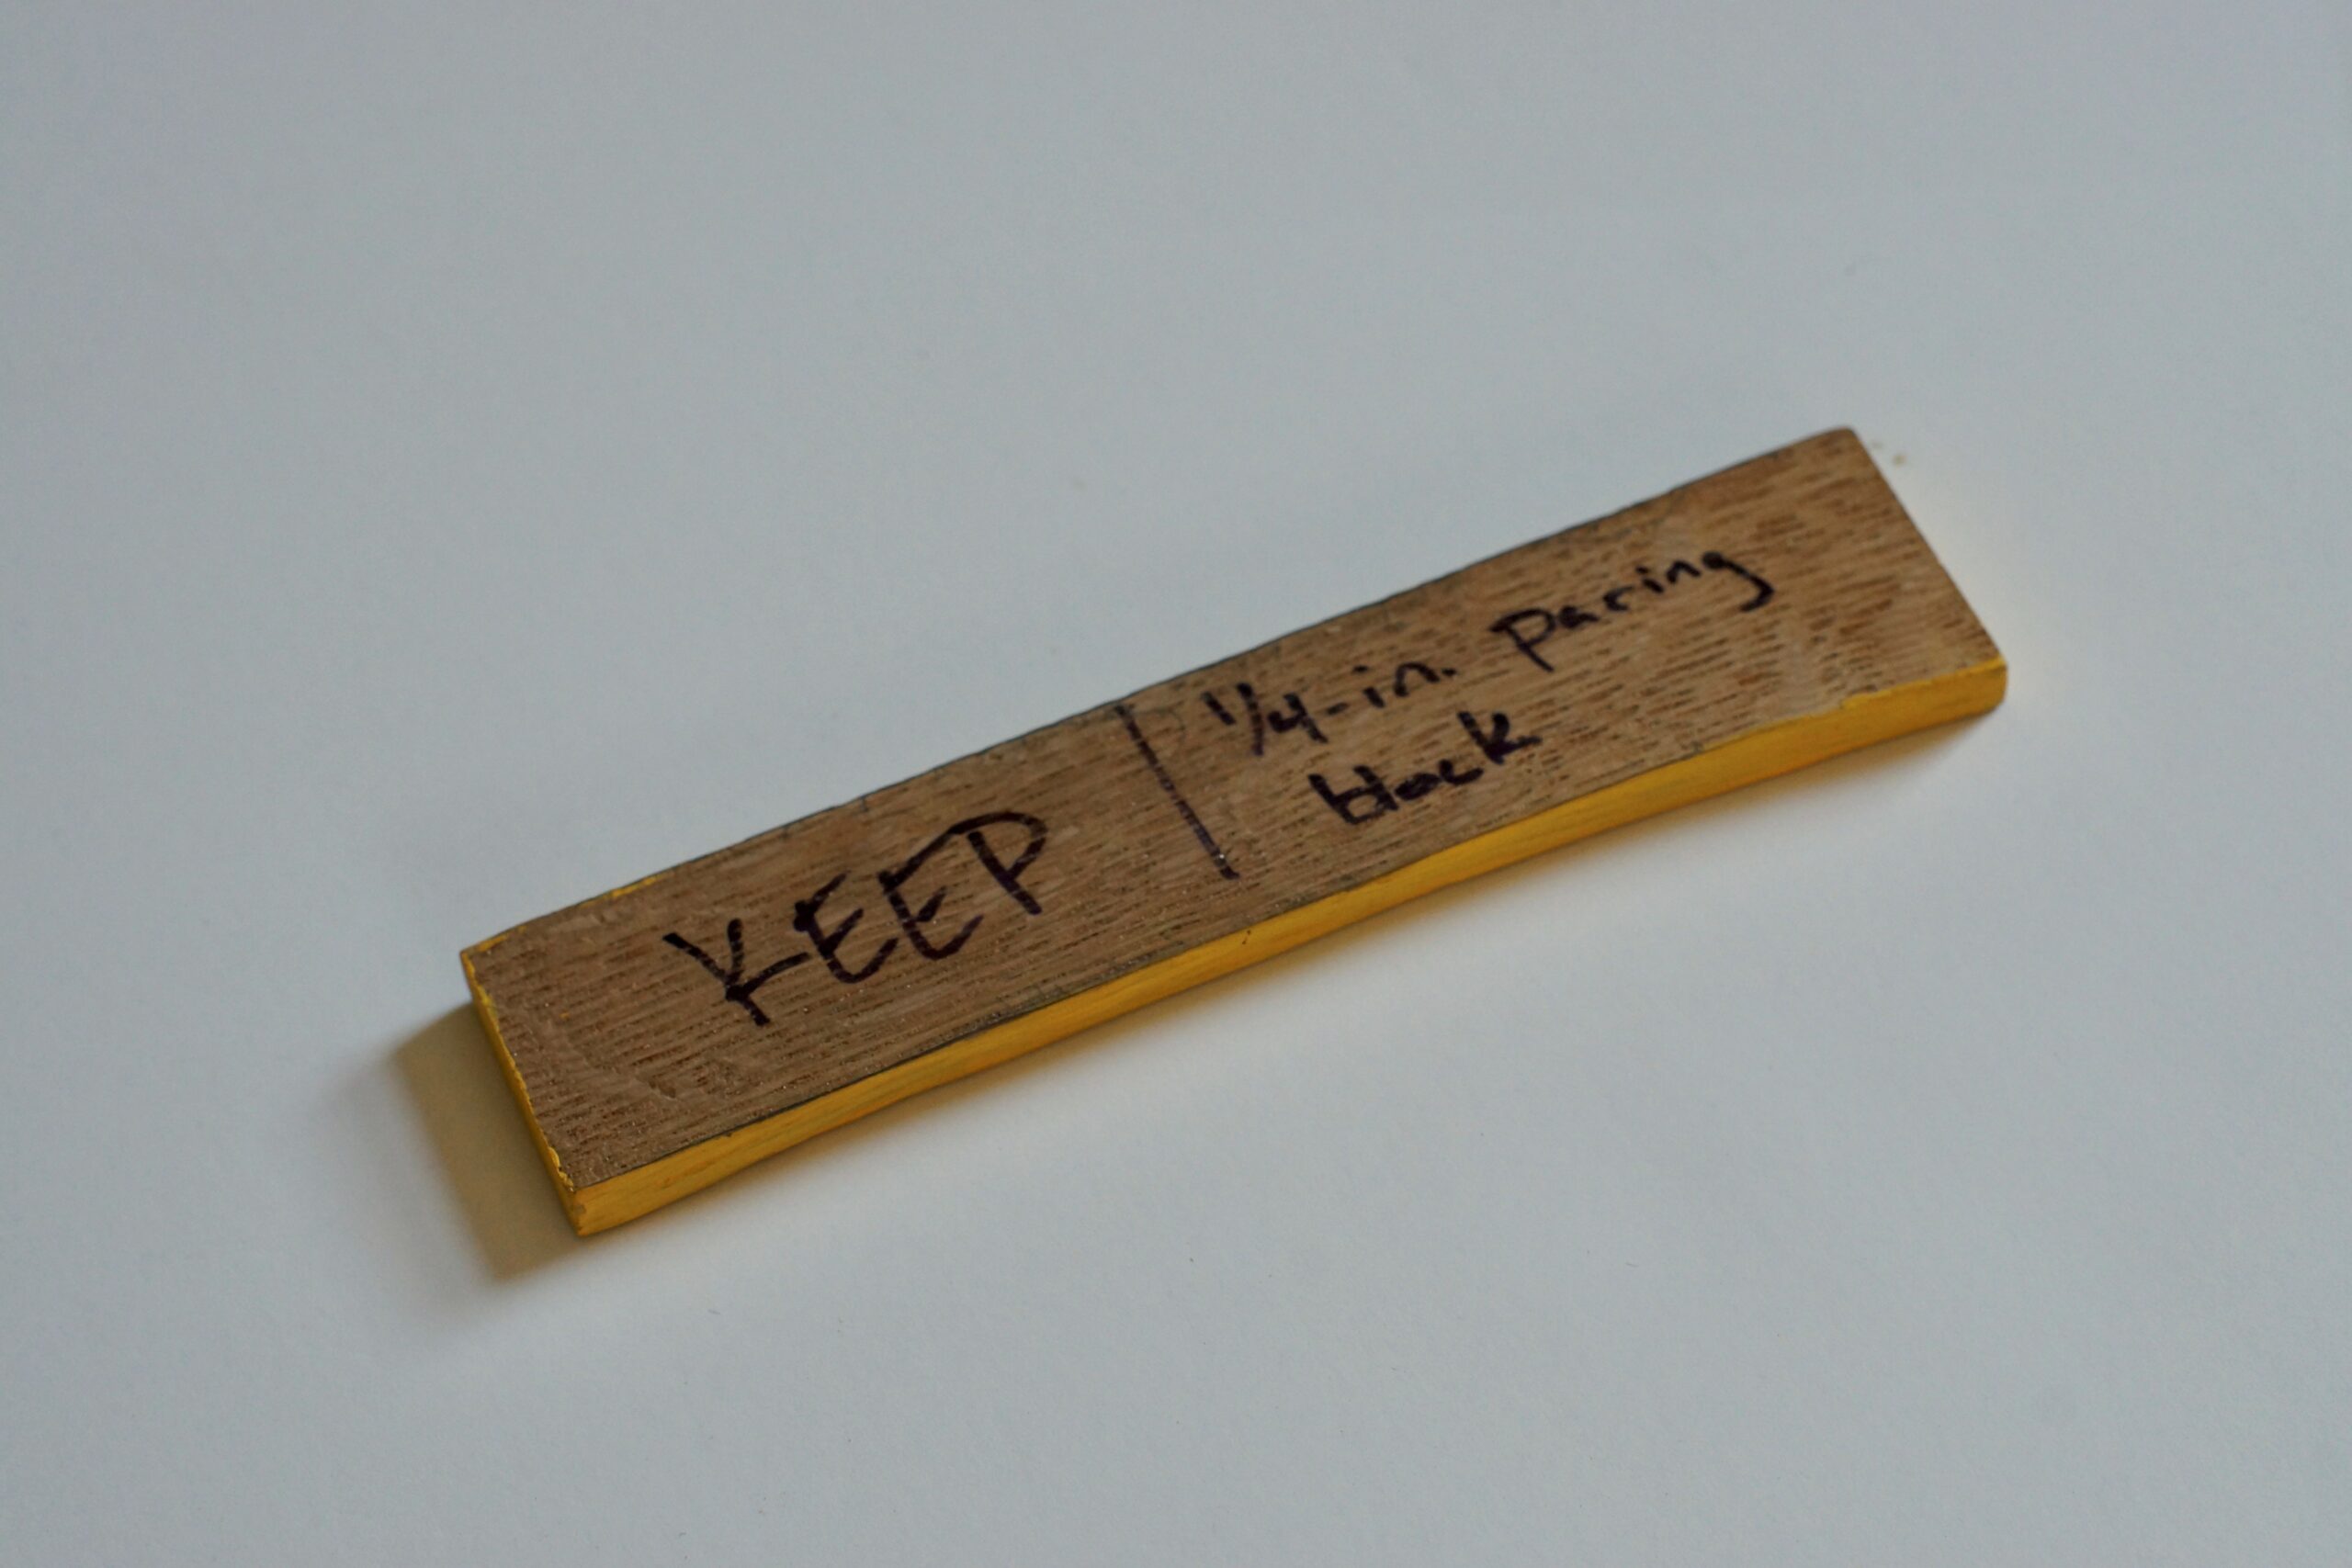 A thin, narrow, short, rectangular piece of wood with writing on it and yellow paint around its perimeter.